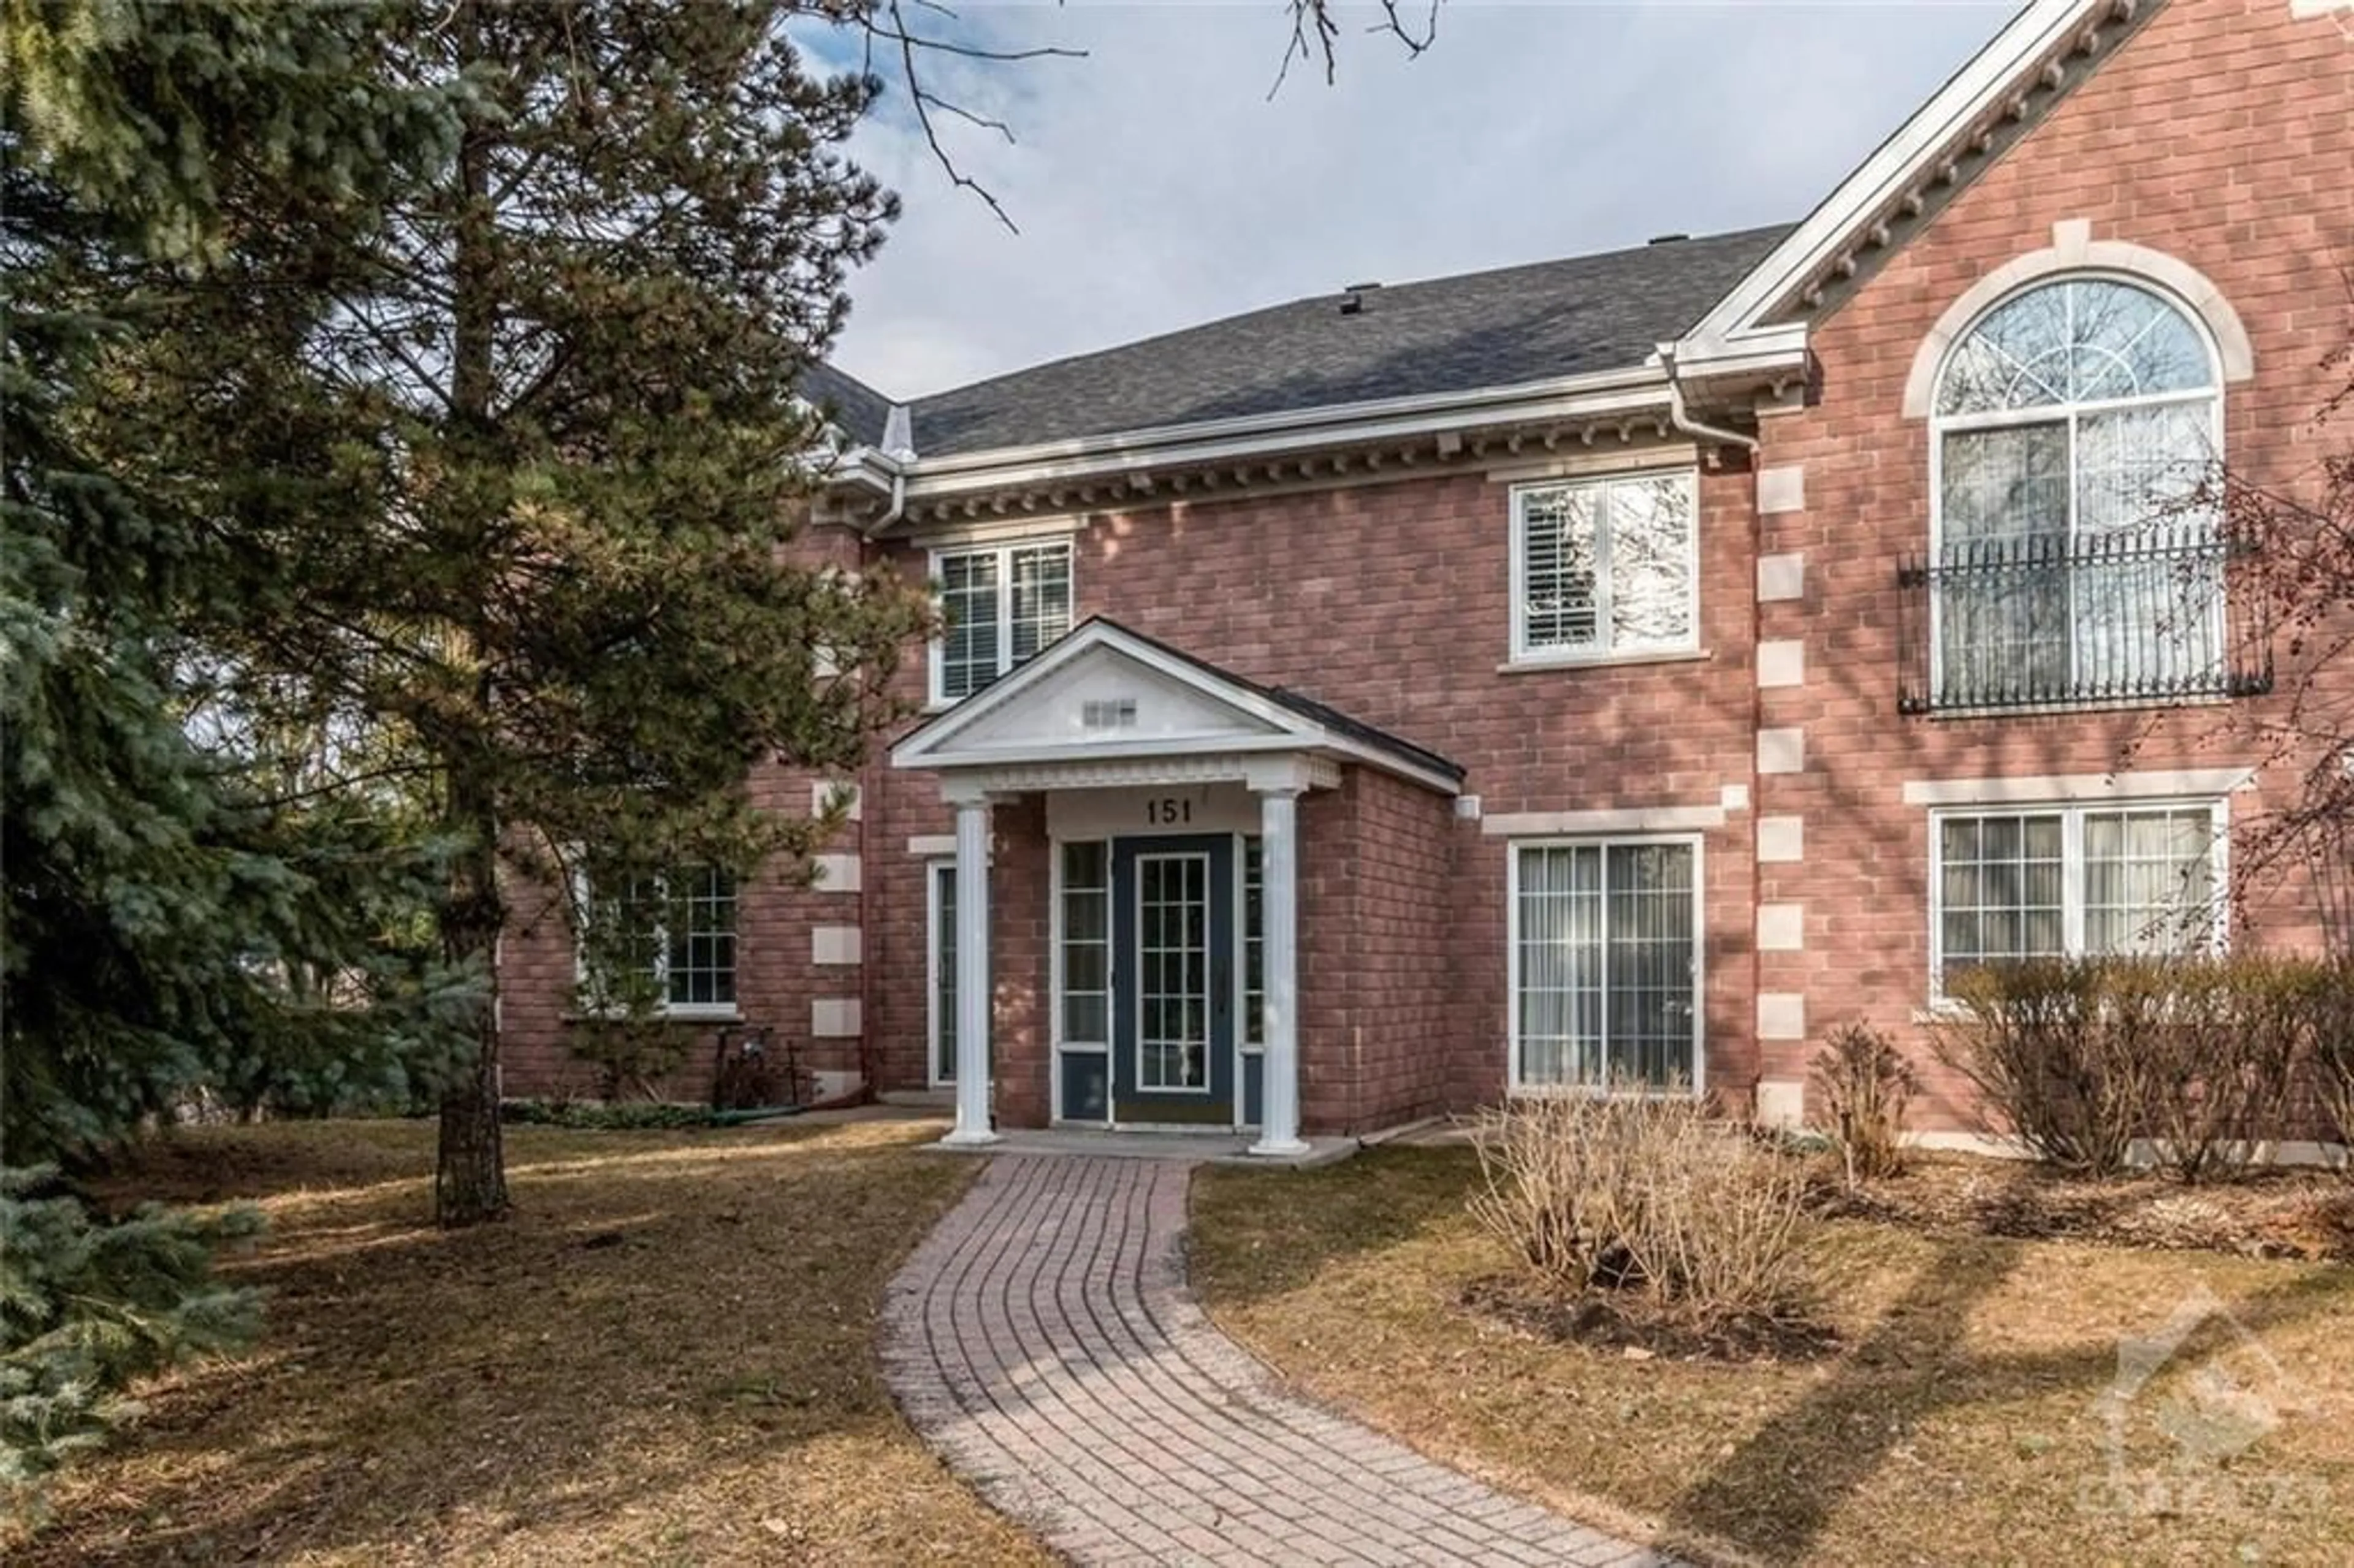 Home with brick exterior material for 151 ROBSON Crt #2B, Ottawa Ontario K2K 2W1